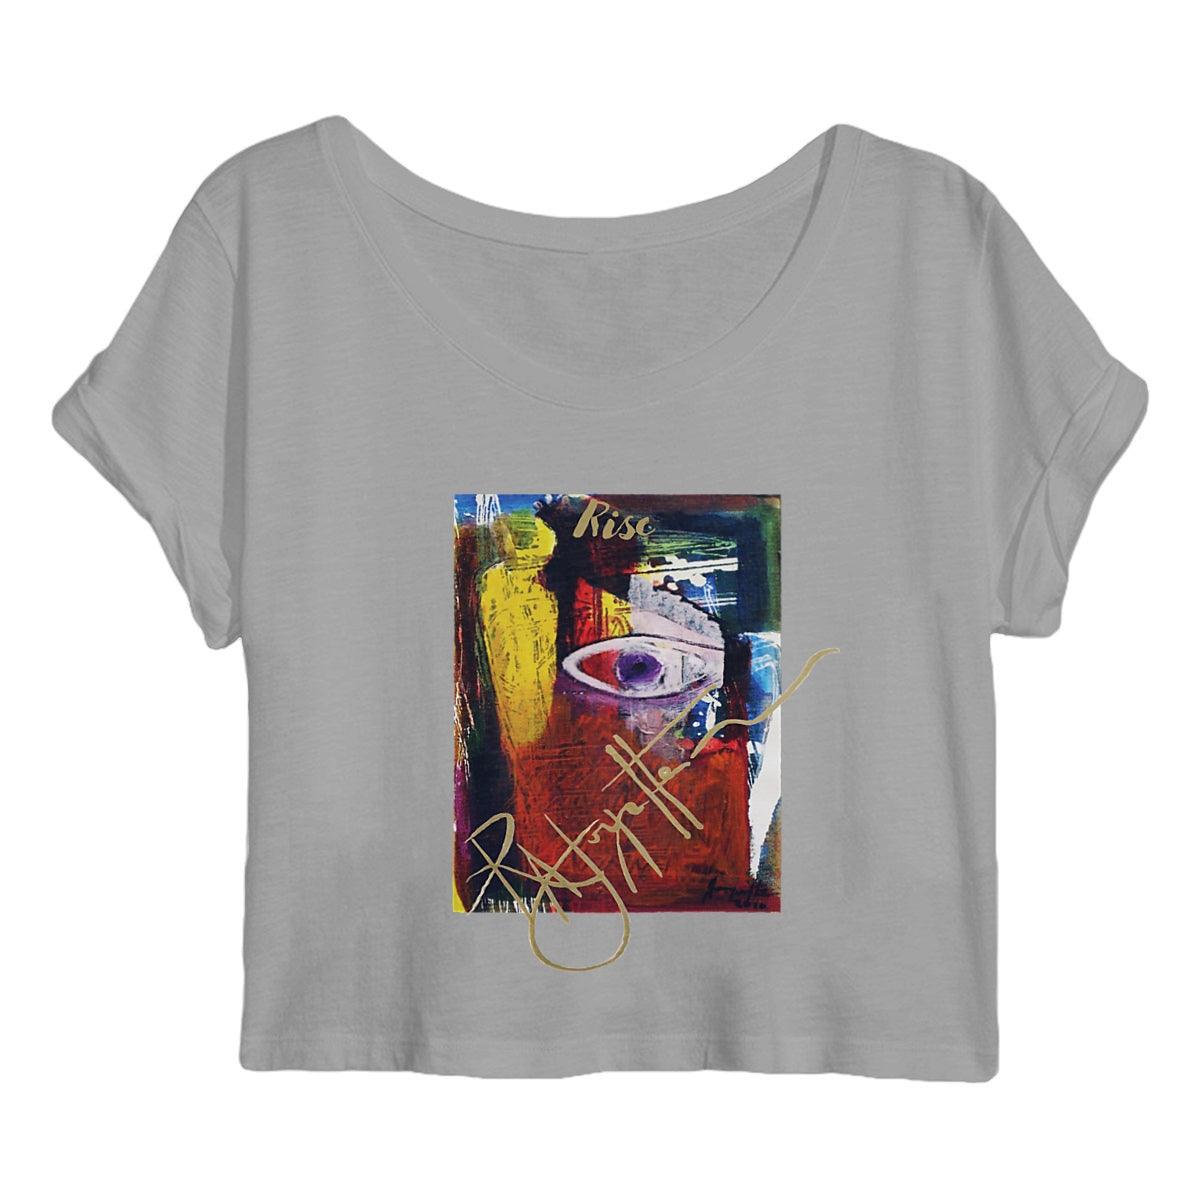 Rise! Dedication to Haiti Earthquake Disaster Women's Crop Top, by Robert Joyette, crafted from 100% organic lightweight cotton, featuring rolled sleeves and side seams, activism through art.